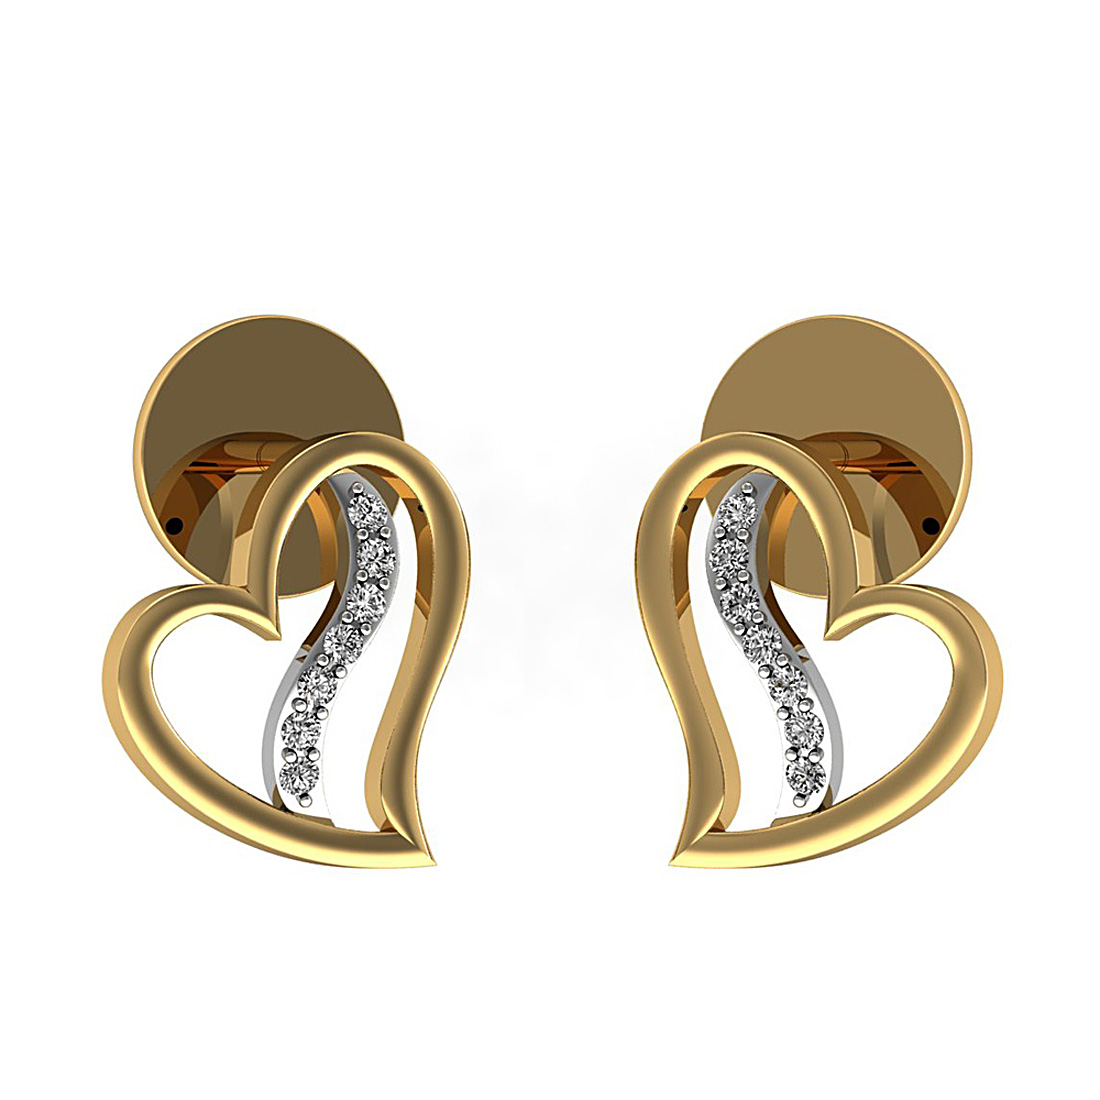 Natural diamond heart stud earrings made in 18k solid gold